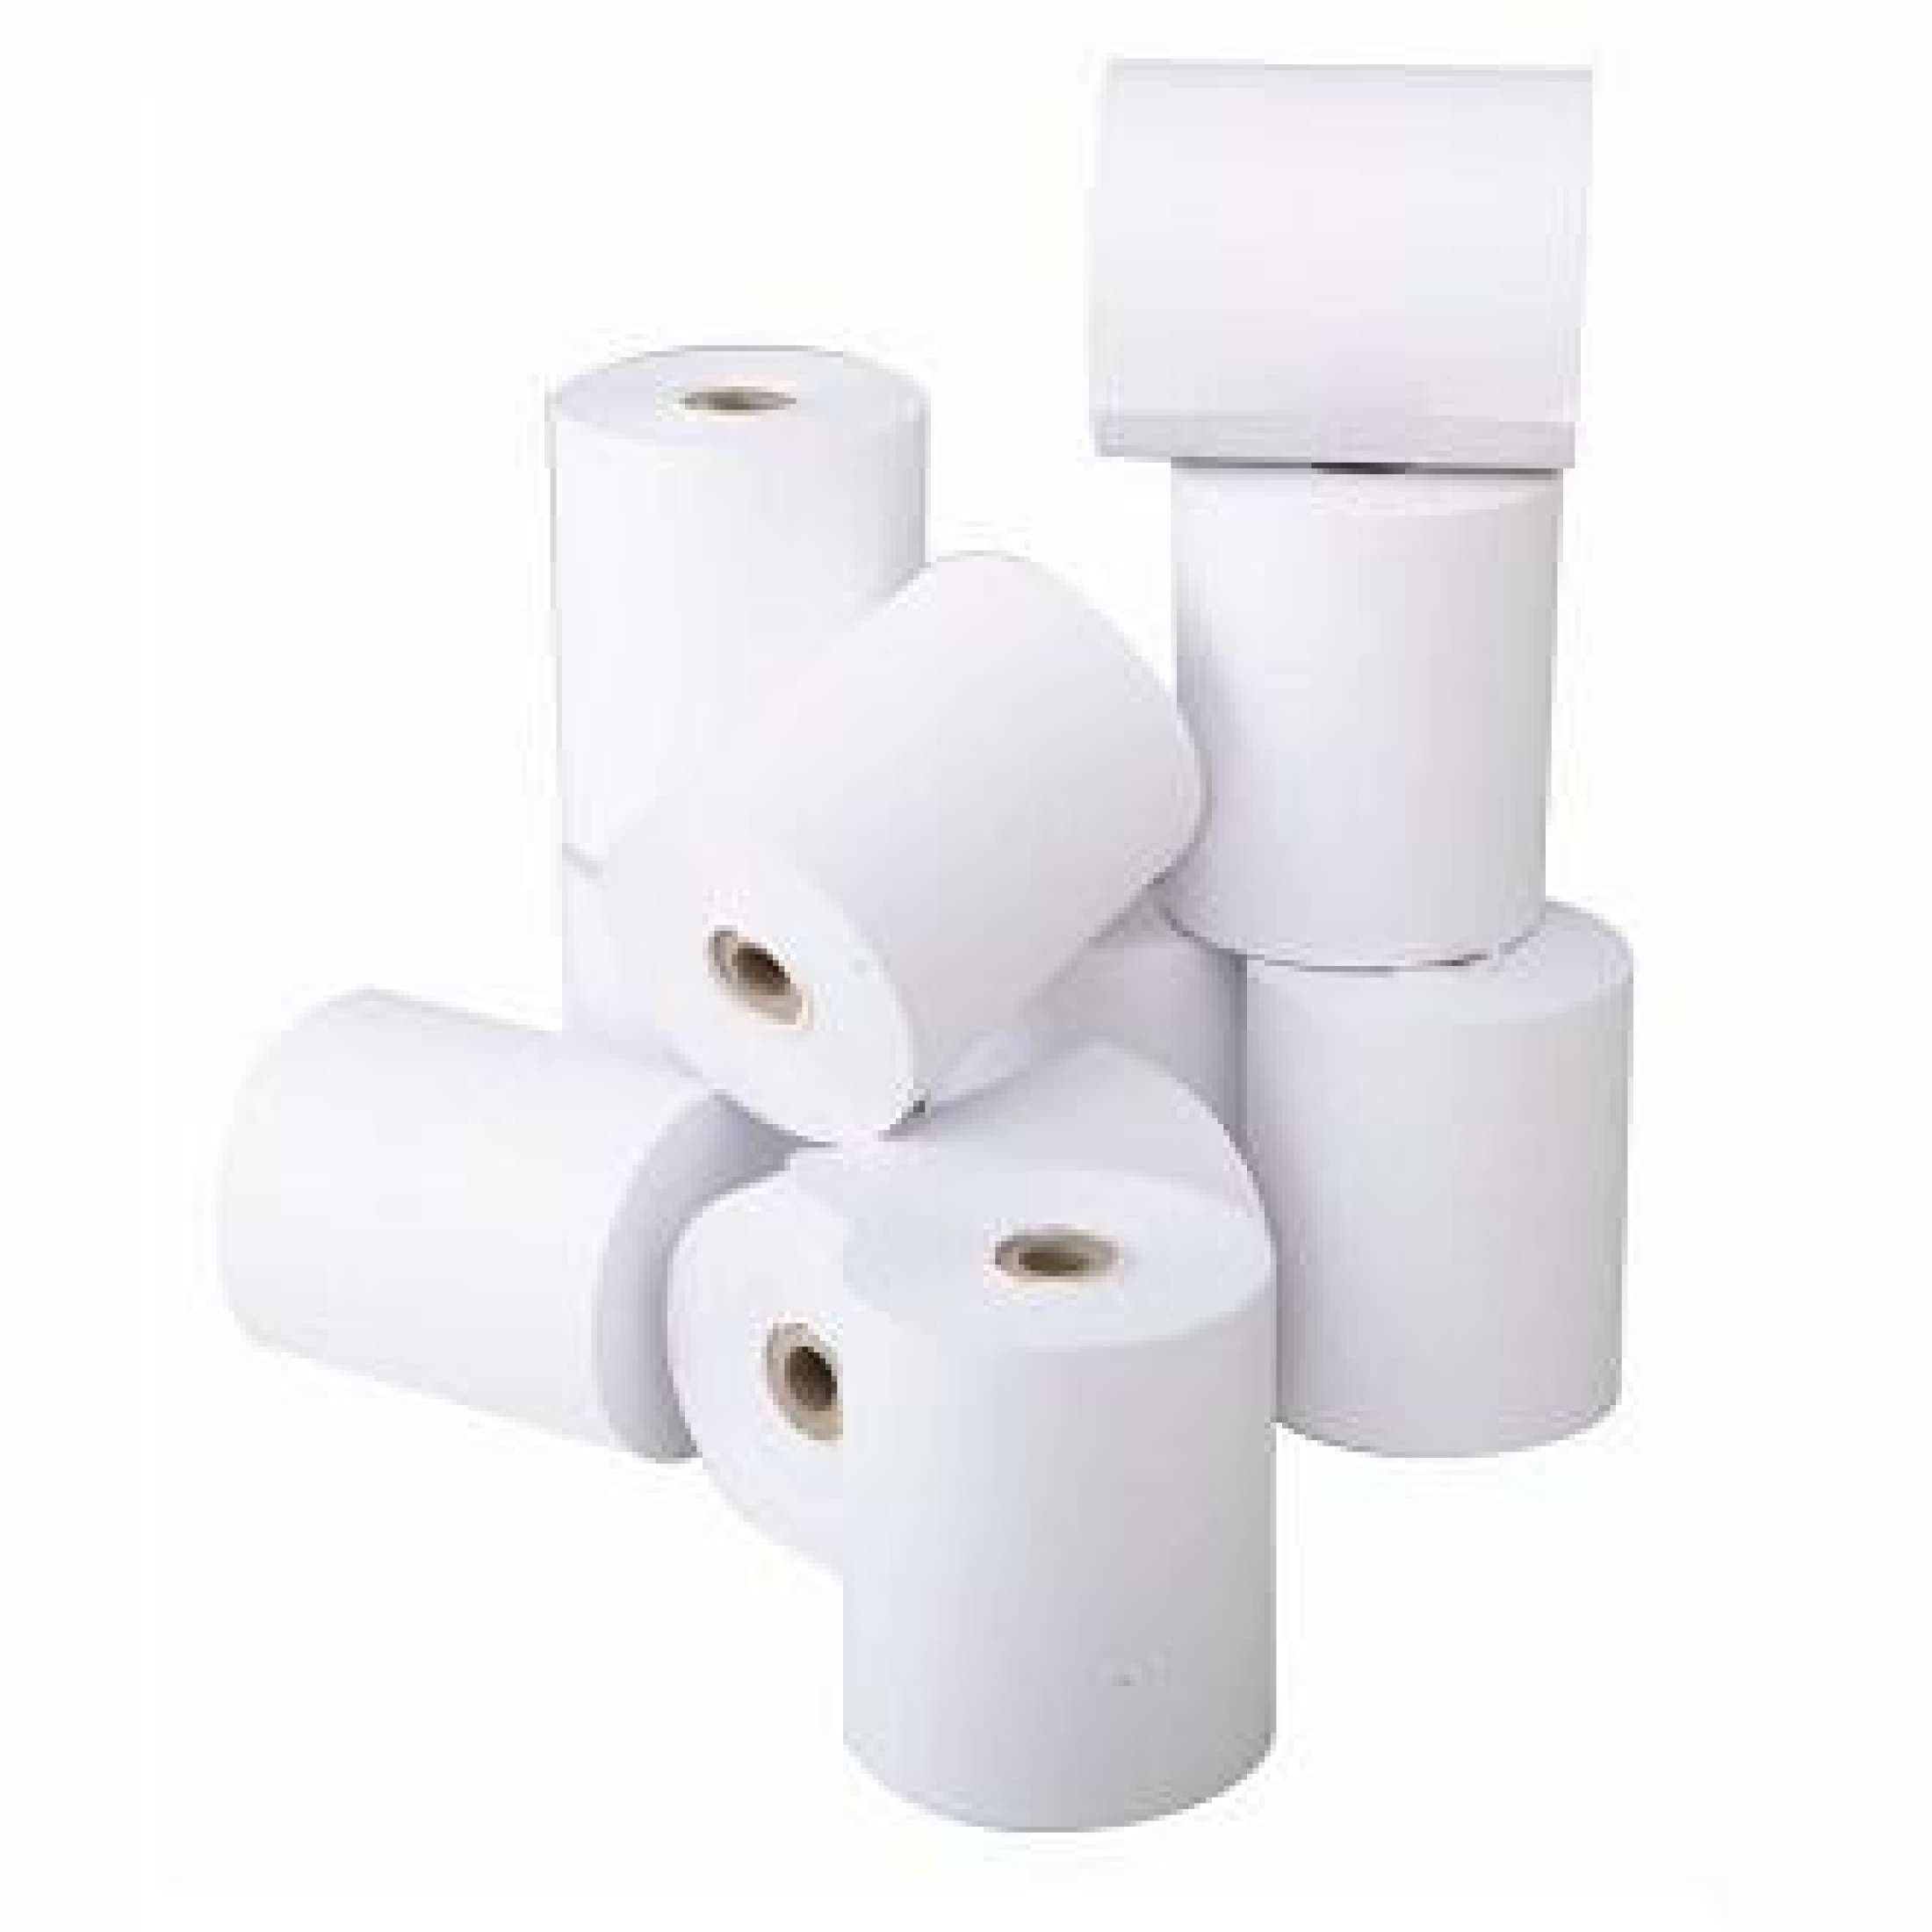 Thermal Roll 3X3 (55M) - White Single Piece